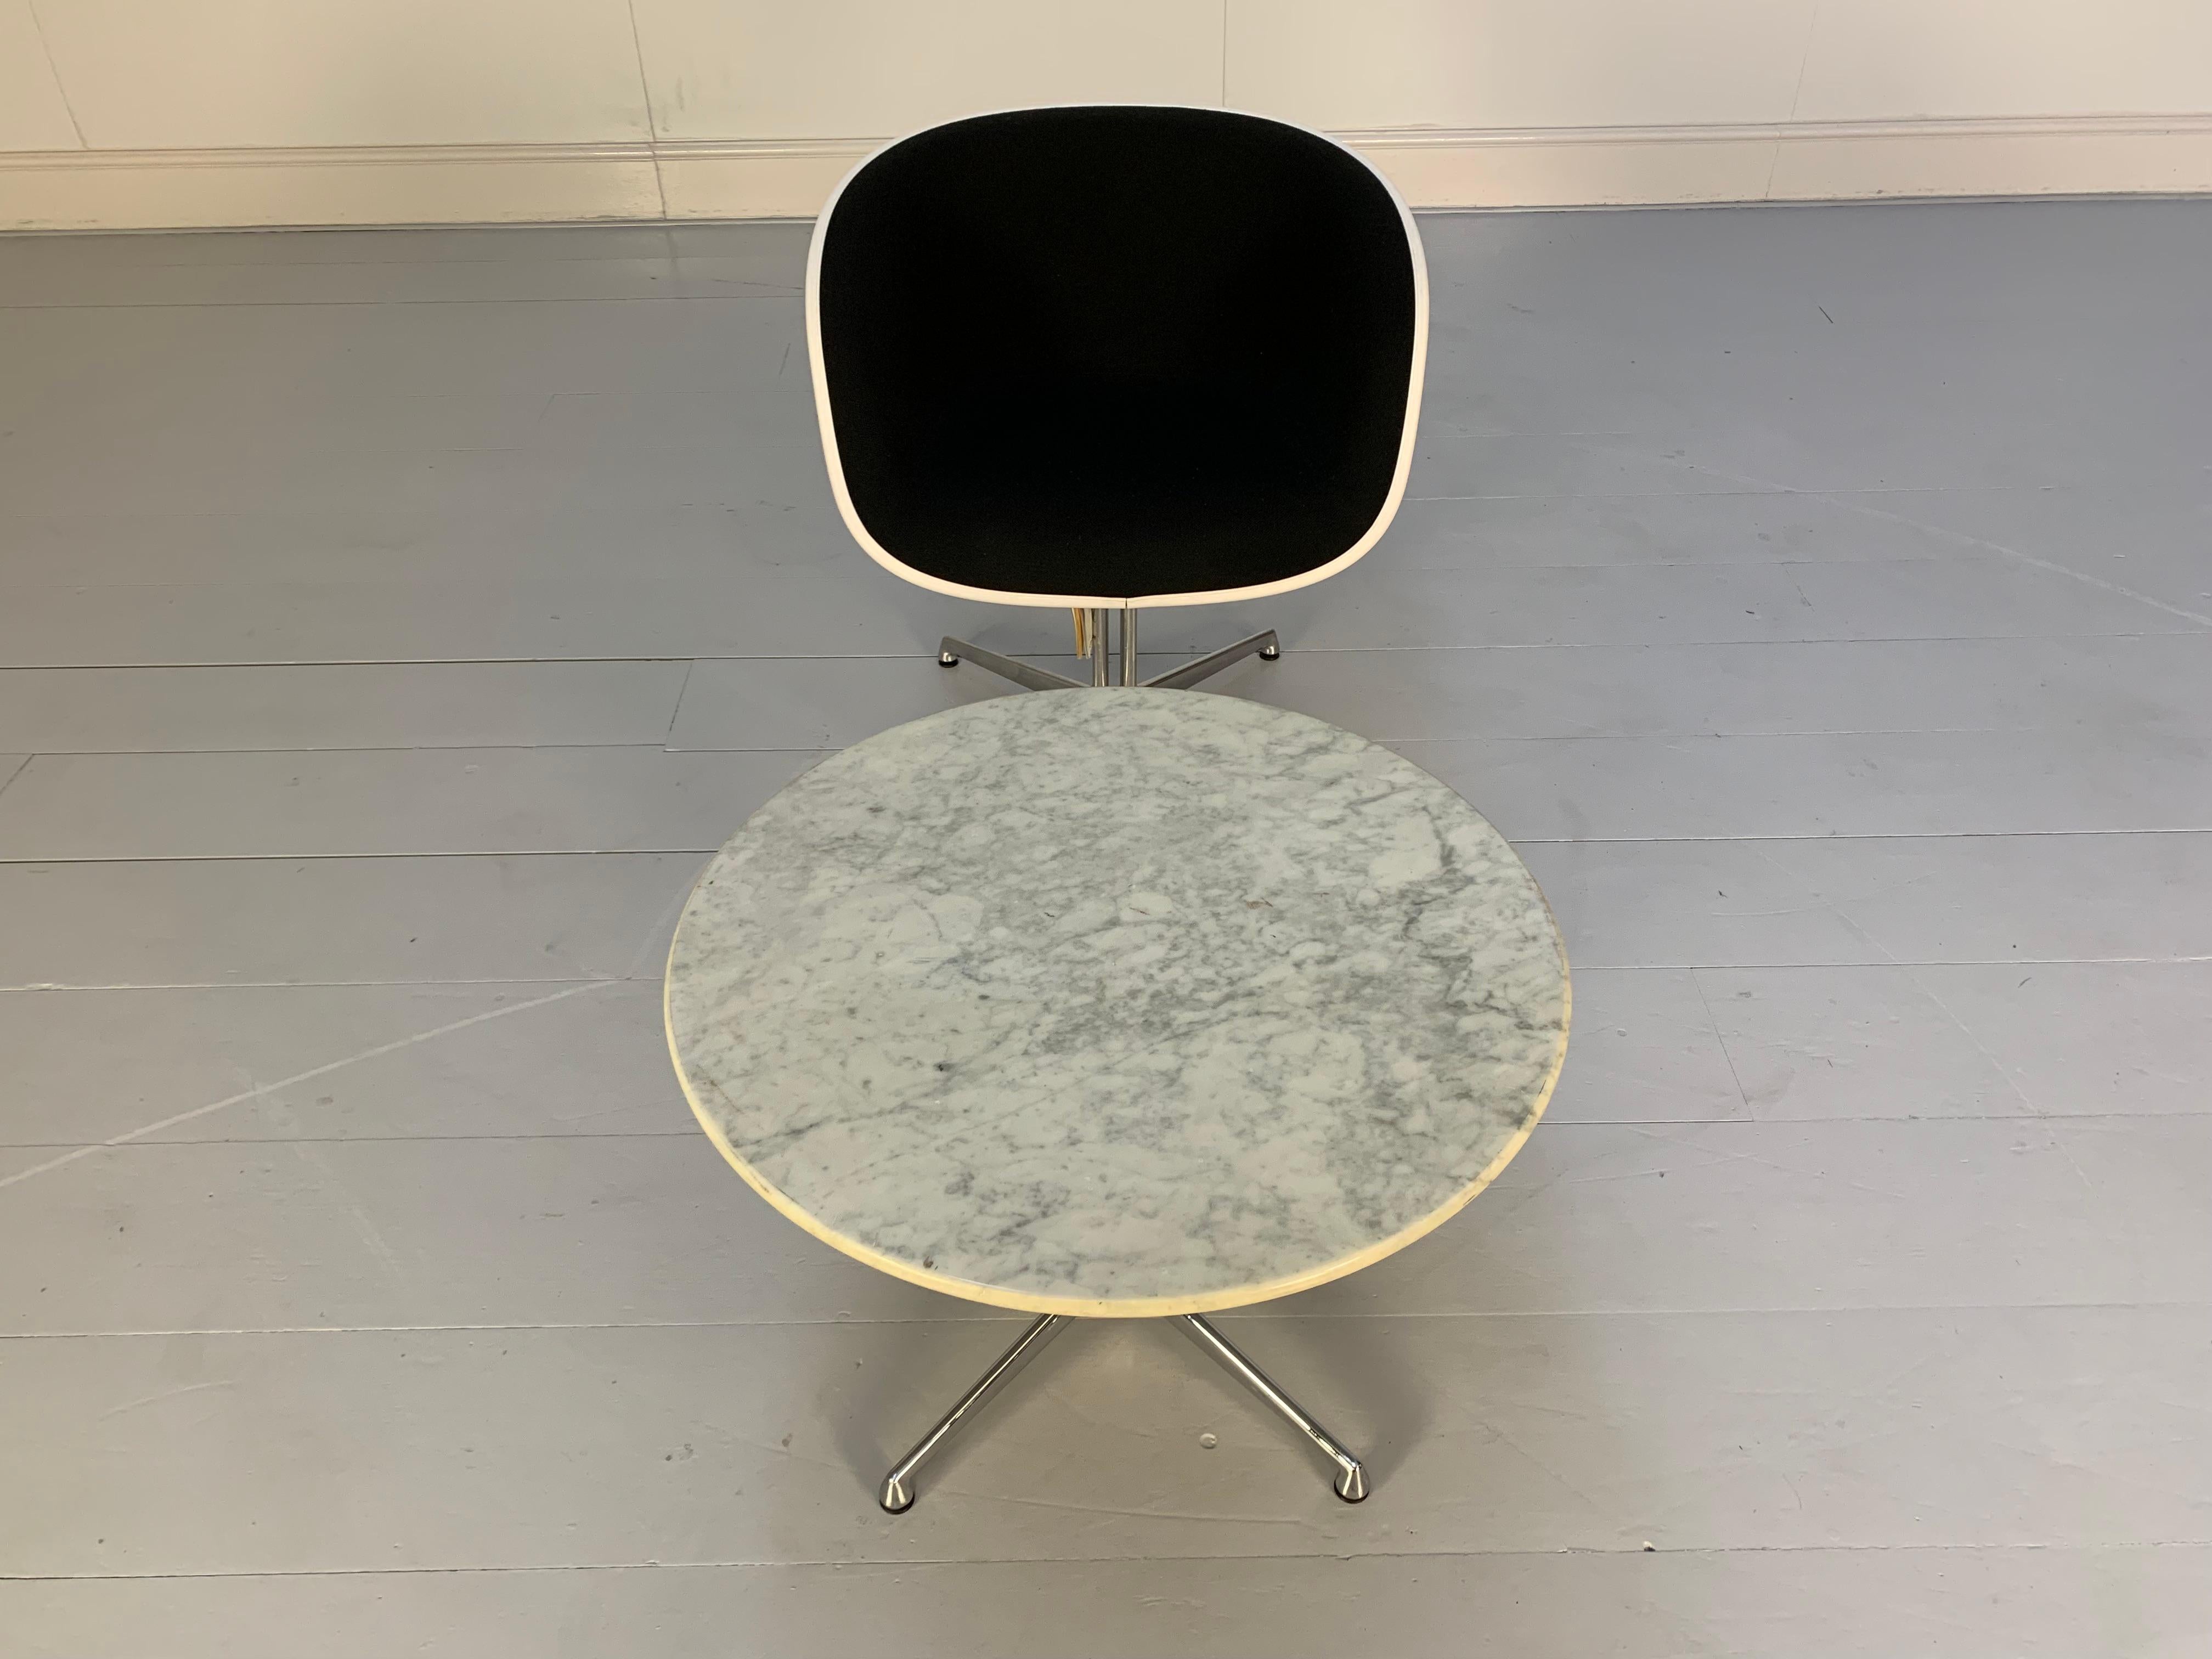 Vitra “La Fonda” Eames Chair & Marble Table in Black Hopsack For Sale 1